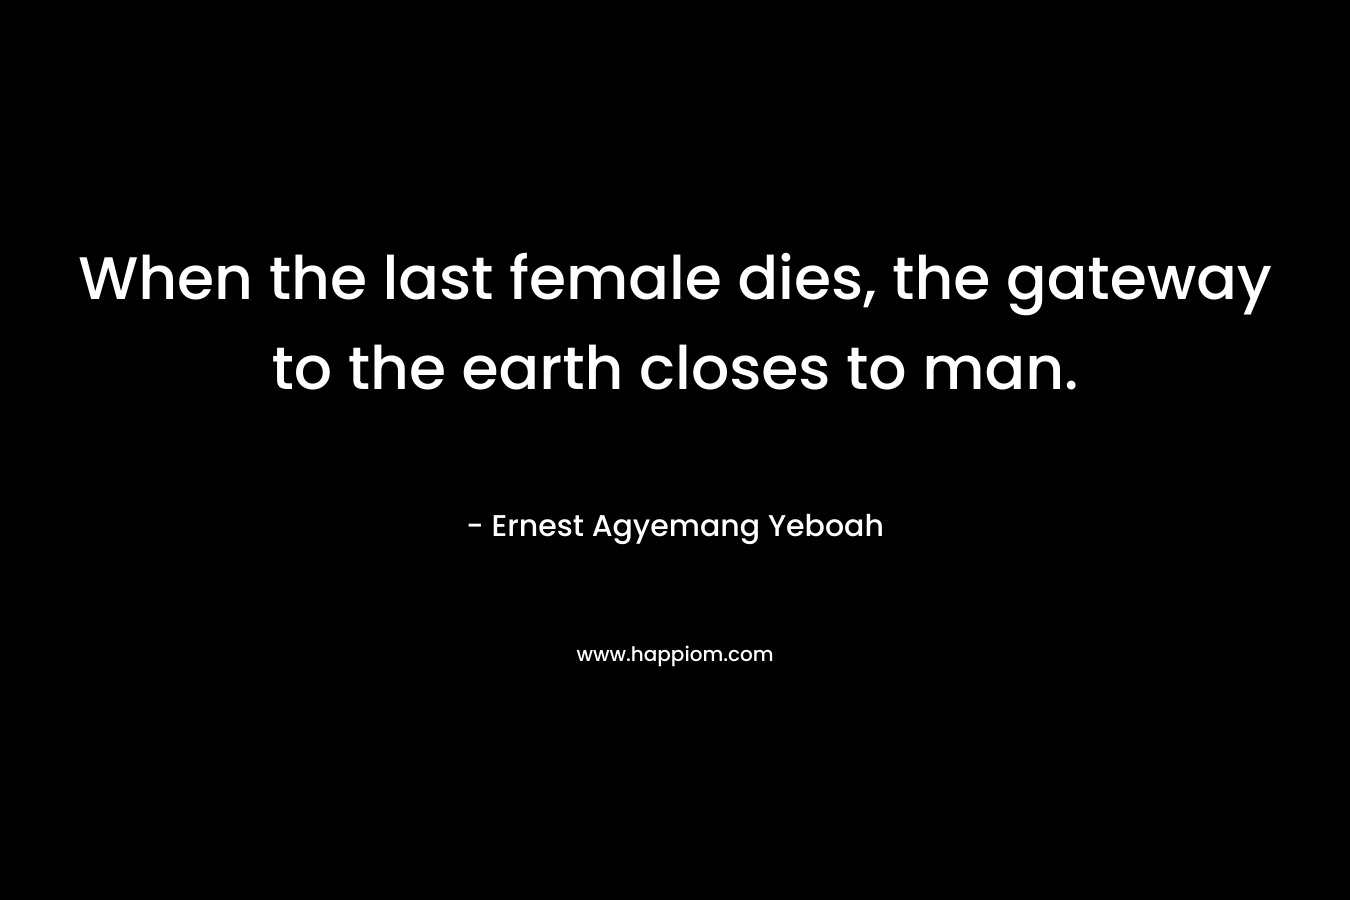 When the last female dies, the gateway to the earth closes to man. – Ernest Agyemang Yeboah